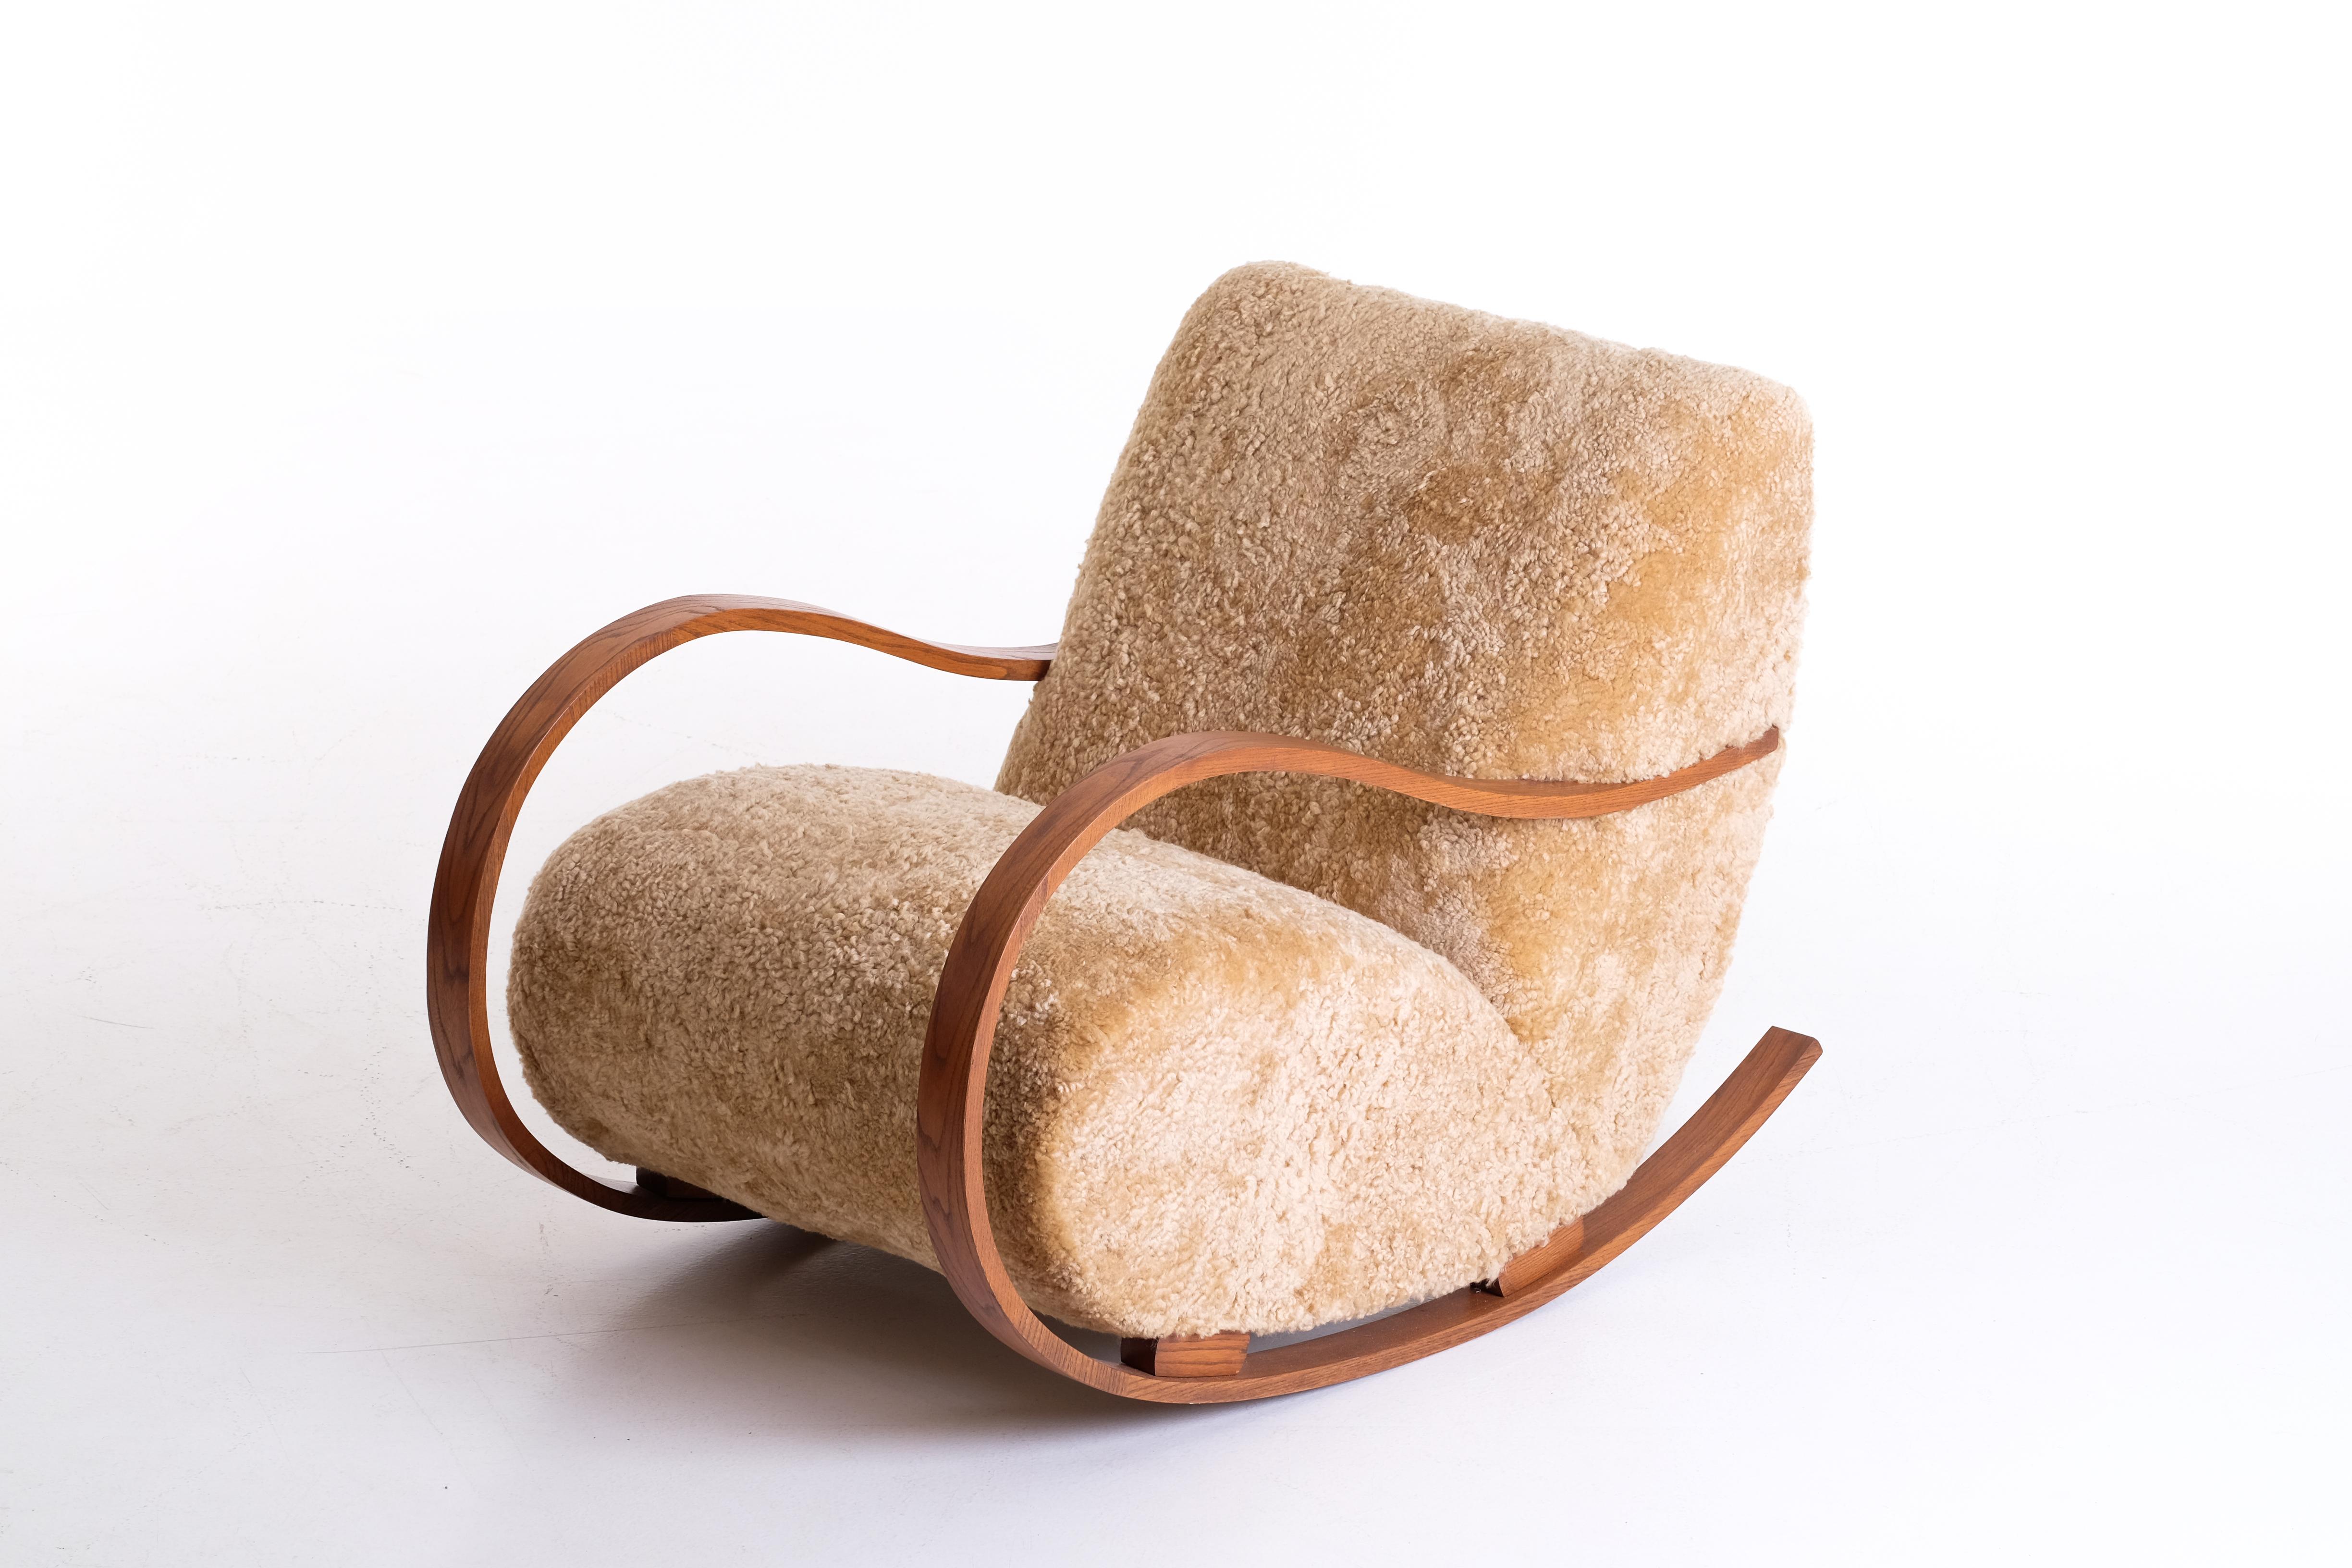 Reupholstered in honey colored sheepskin. Produced in Sweden, 1940s.

